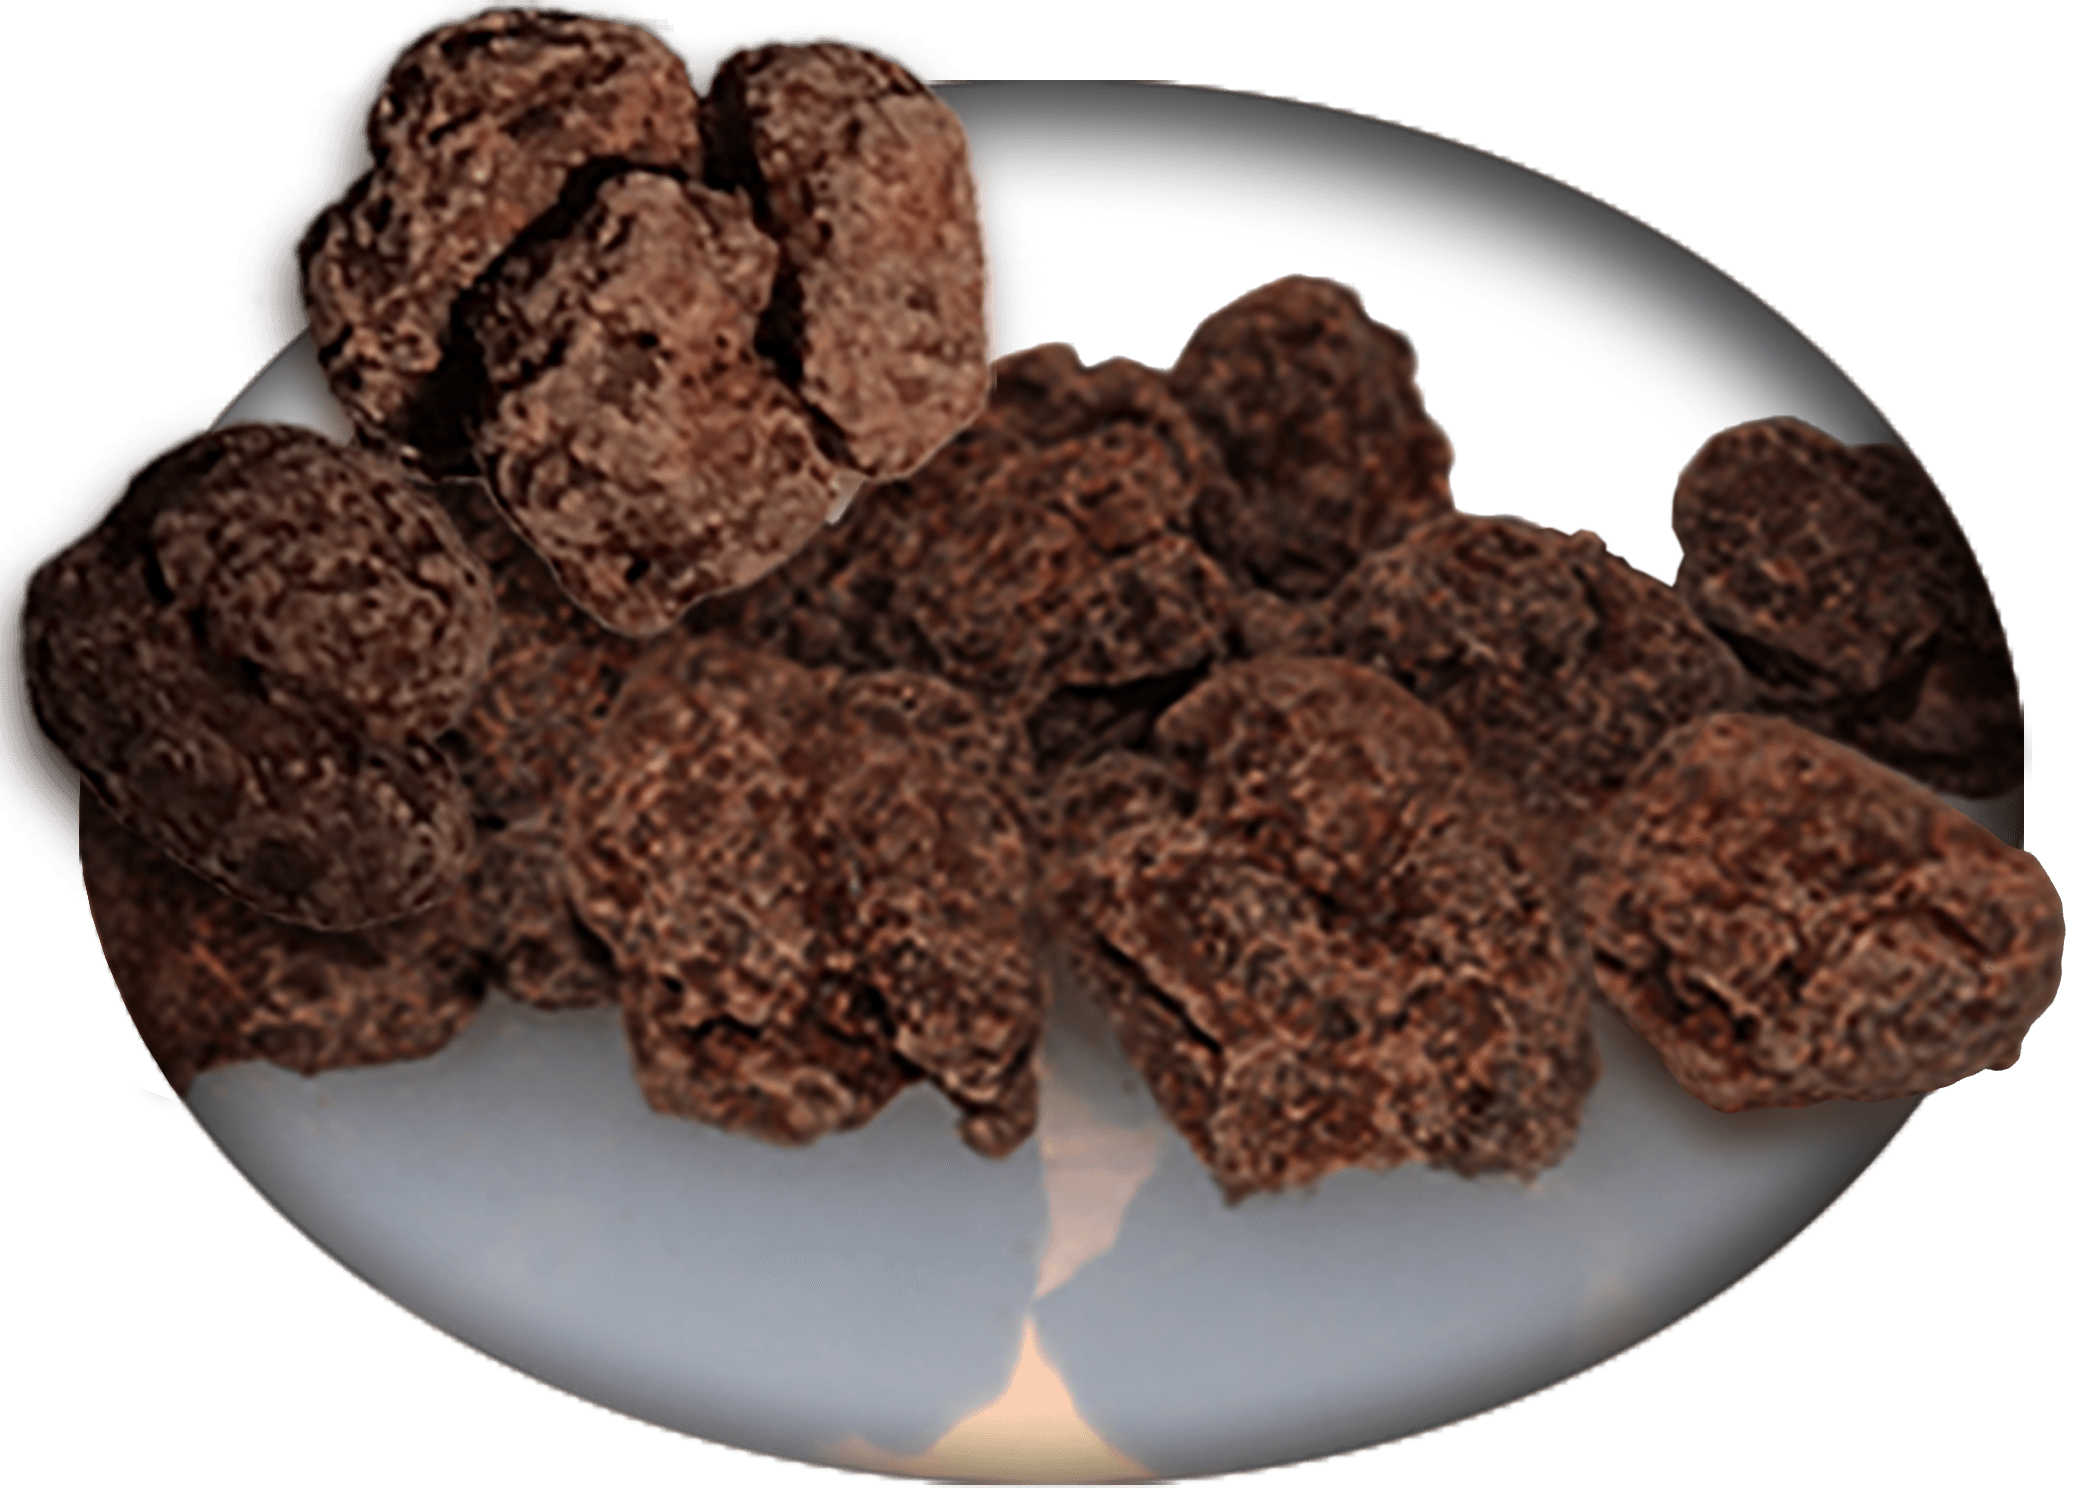 Chocolate Covered Everything — CB's - Organic coffee beans covered and dusted in dark chocolate. Shipping, delivery, and pick up. Place your order!